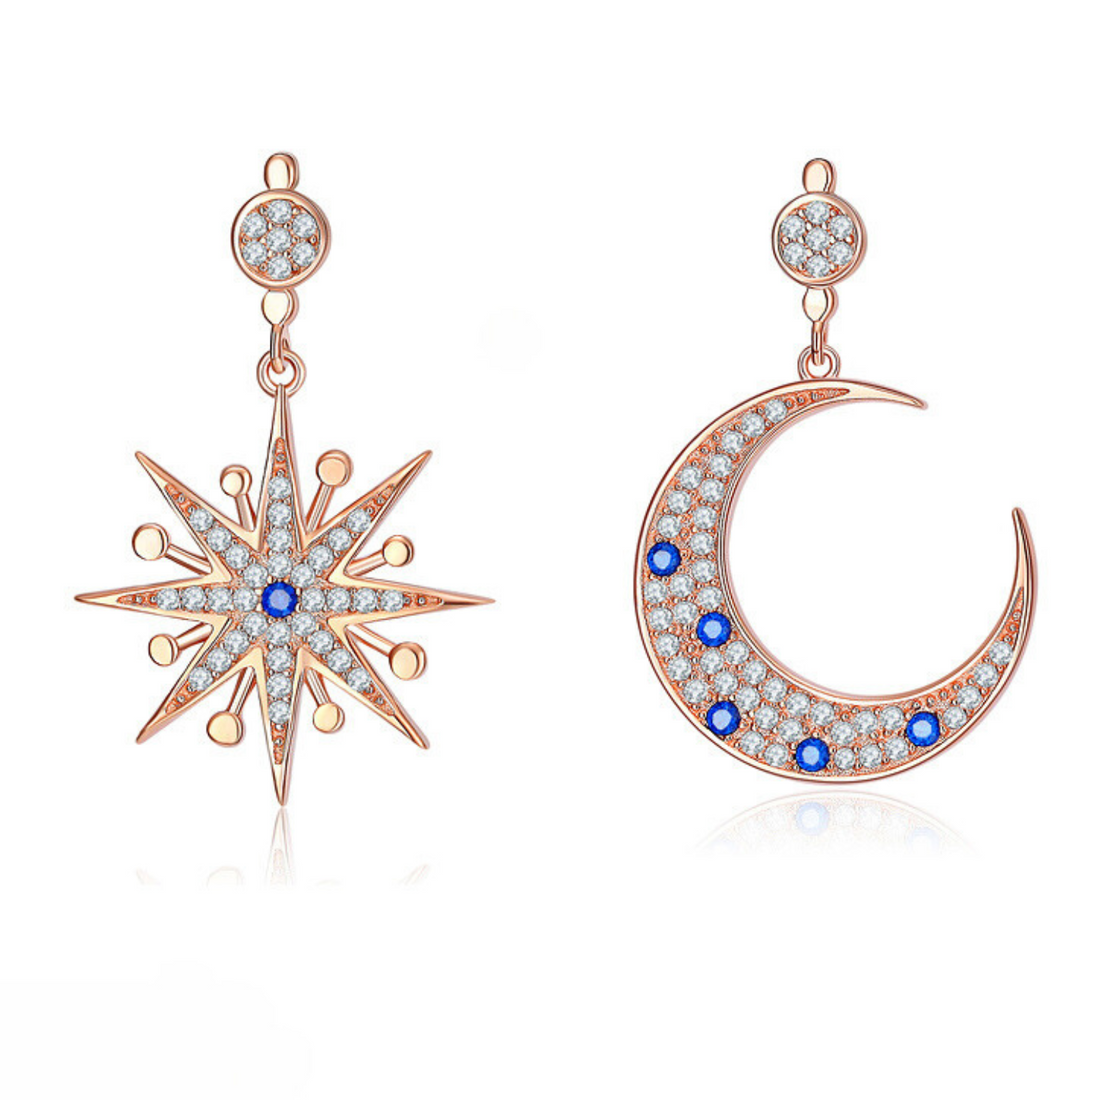 Stunning Star and moon earrings made in Rose Gold with quality cubic zirconia stones.